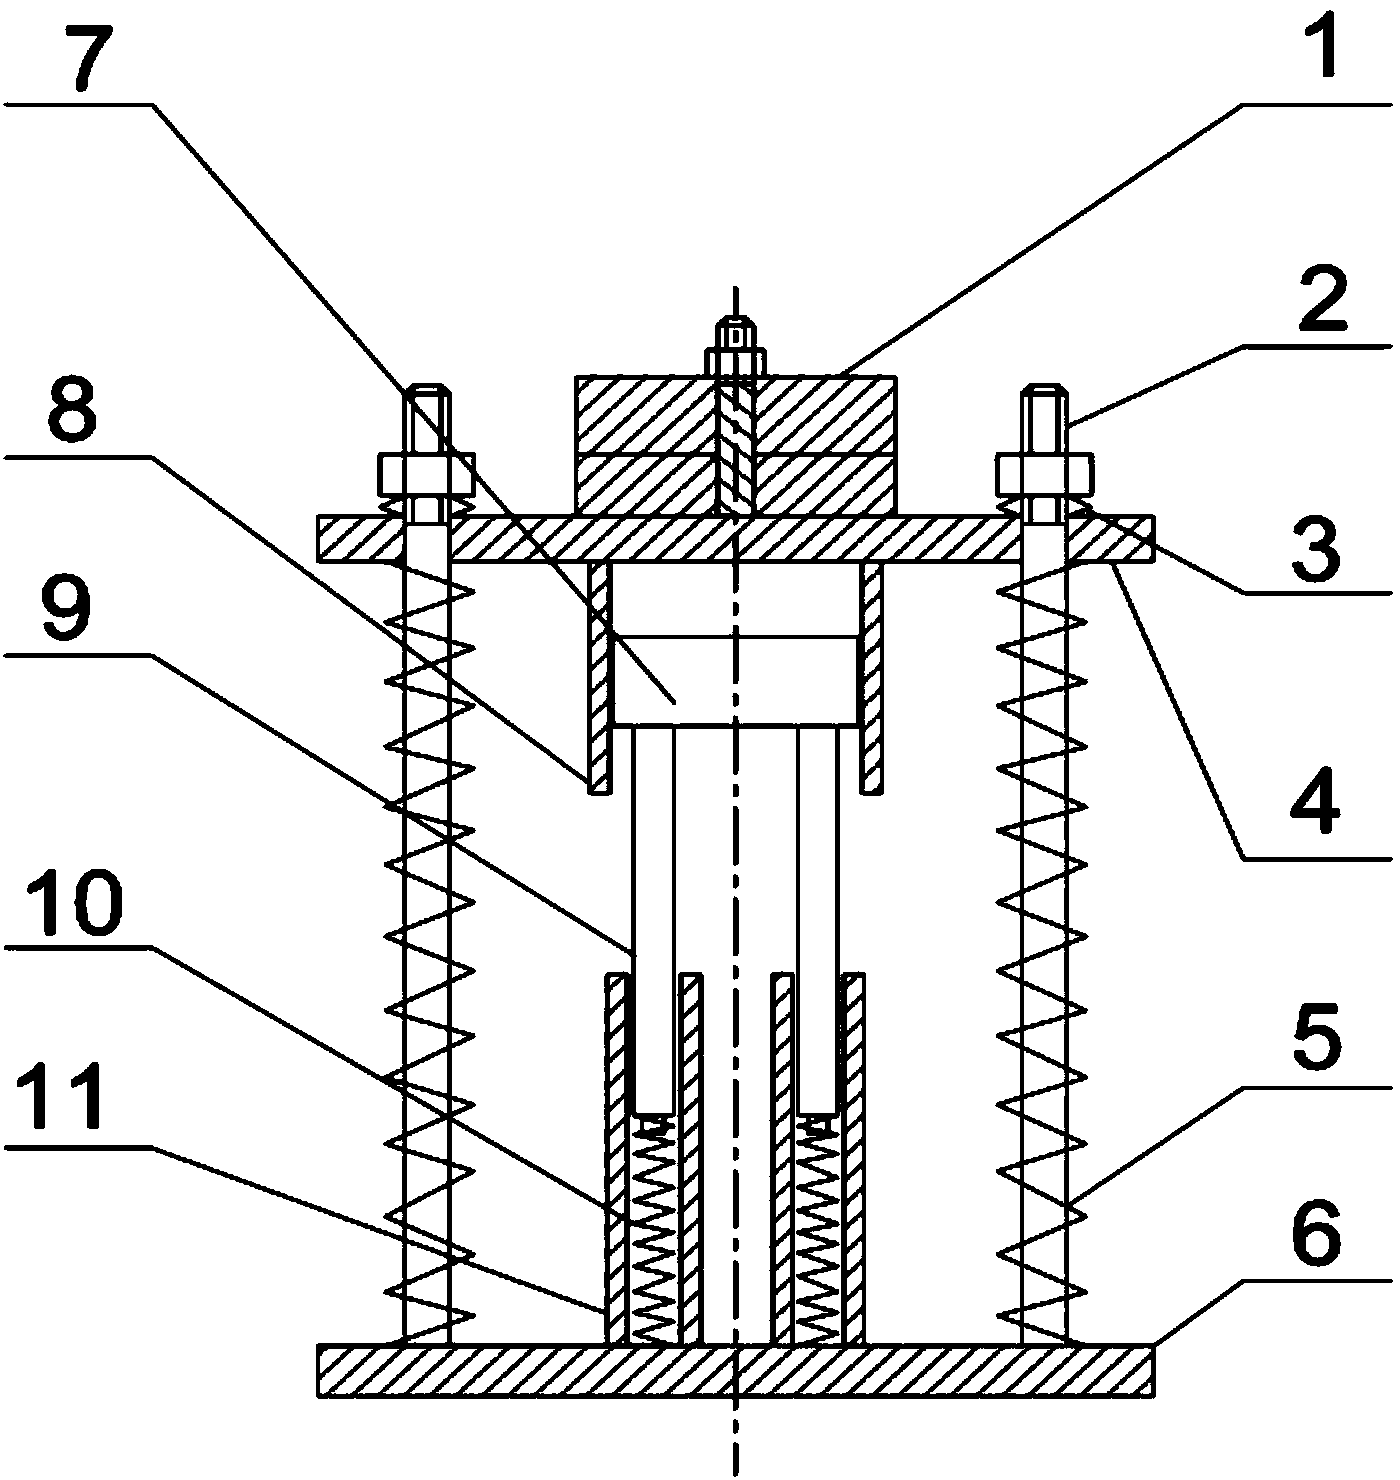 Semi-active bump leveler with adjustable parameters based on magnetostriction materials